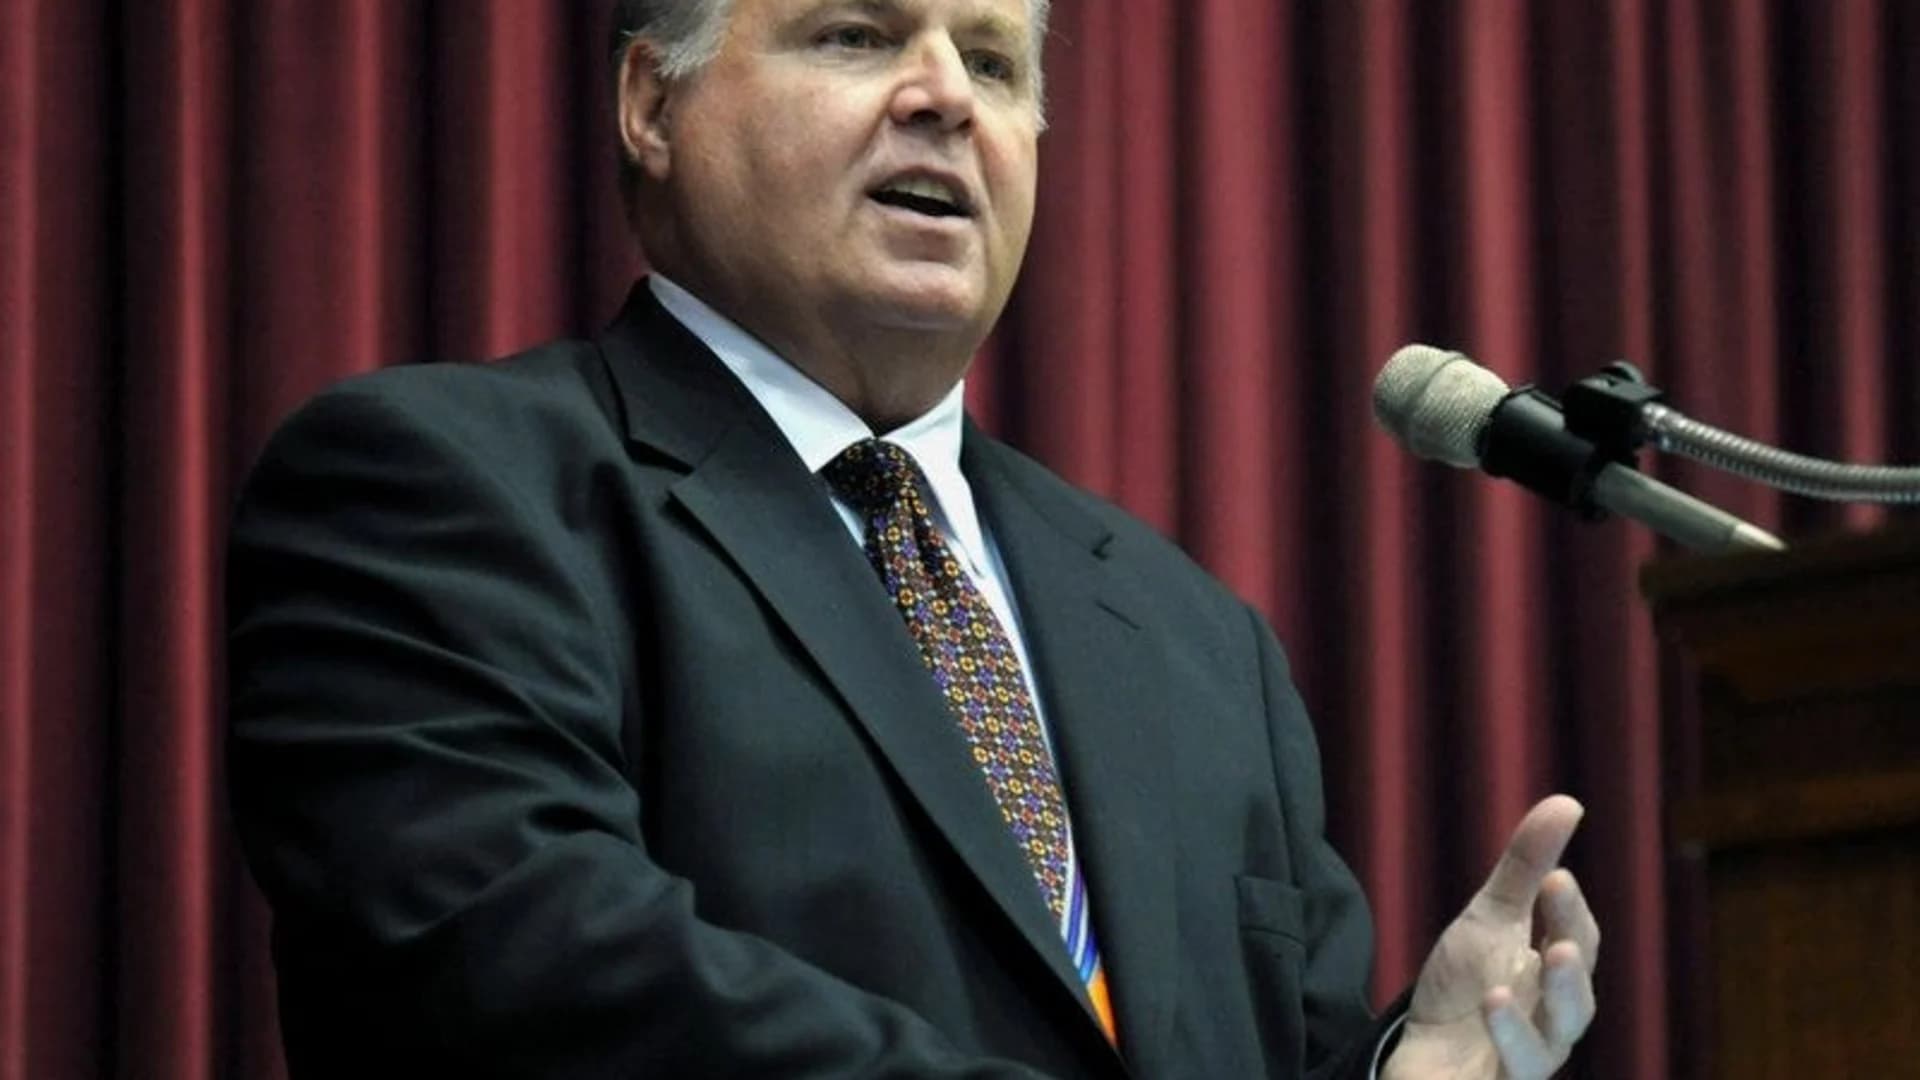 (copy) Rush Limbaugh says he's been diagnosed with lung cancer